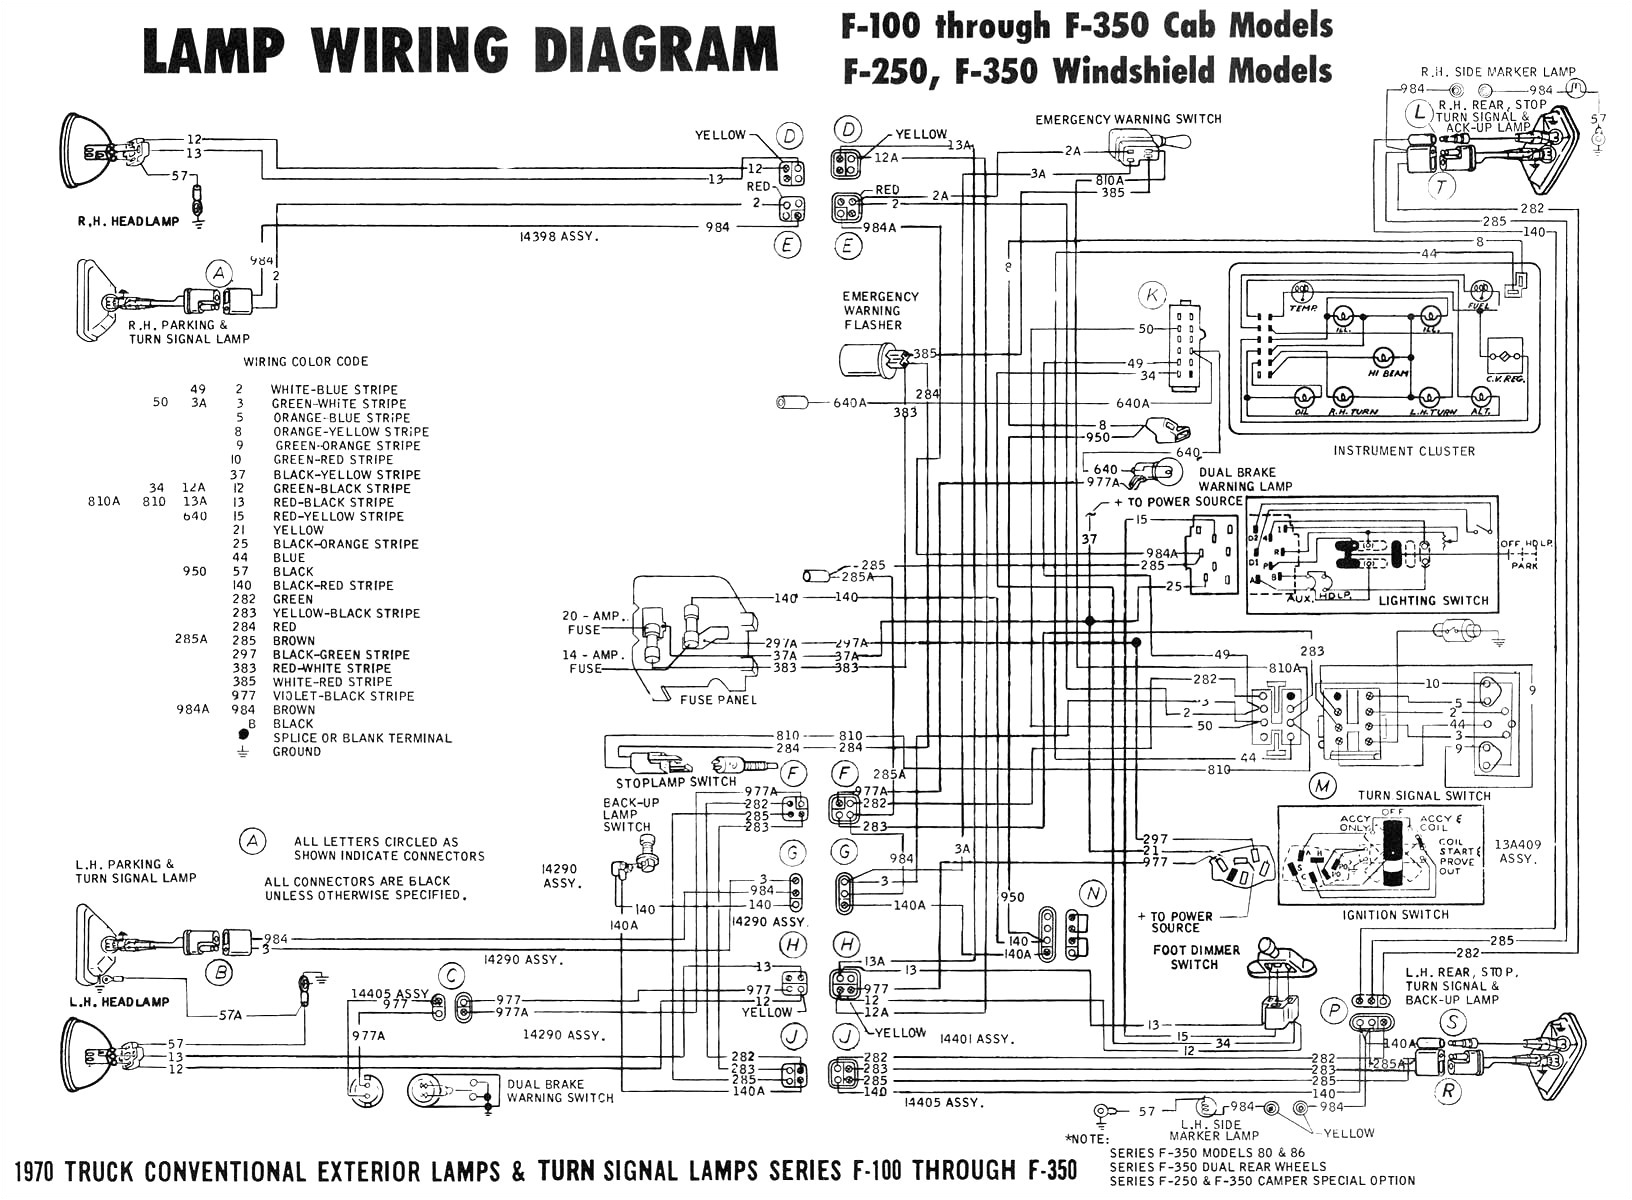 ford 1700 engine wiring diagram wiring diagram view ford 2110 tractor wiring diagram ford 2110 wiring diagram